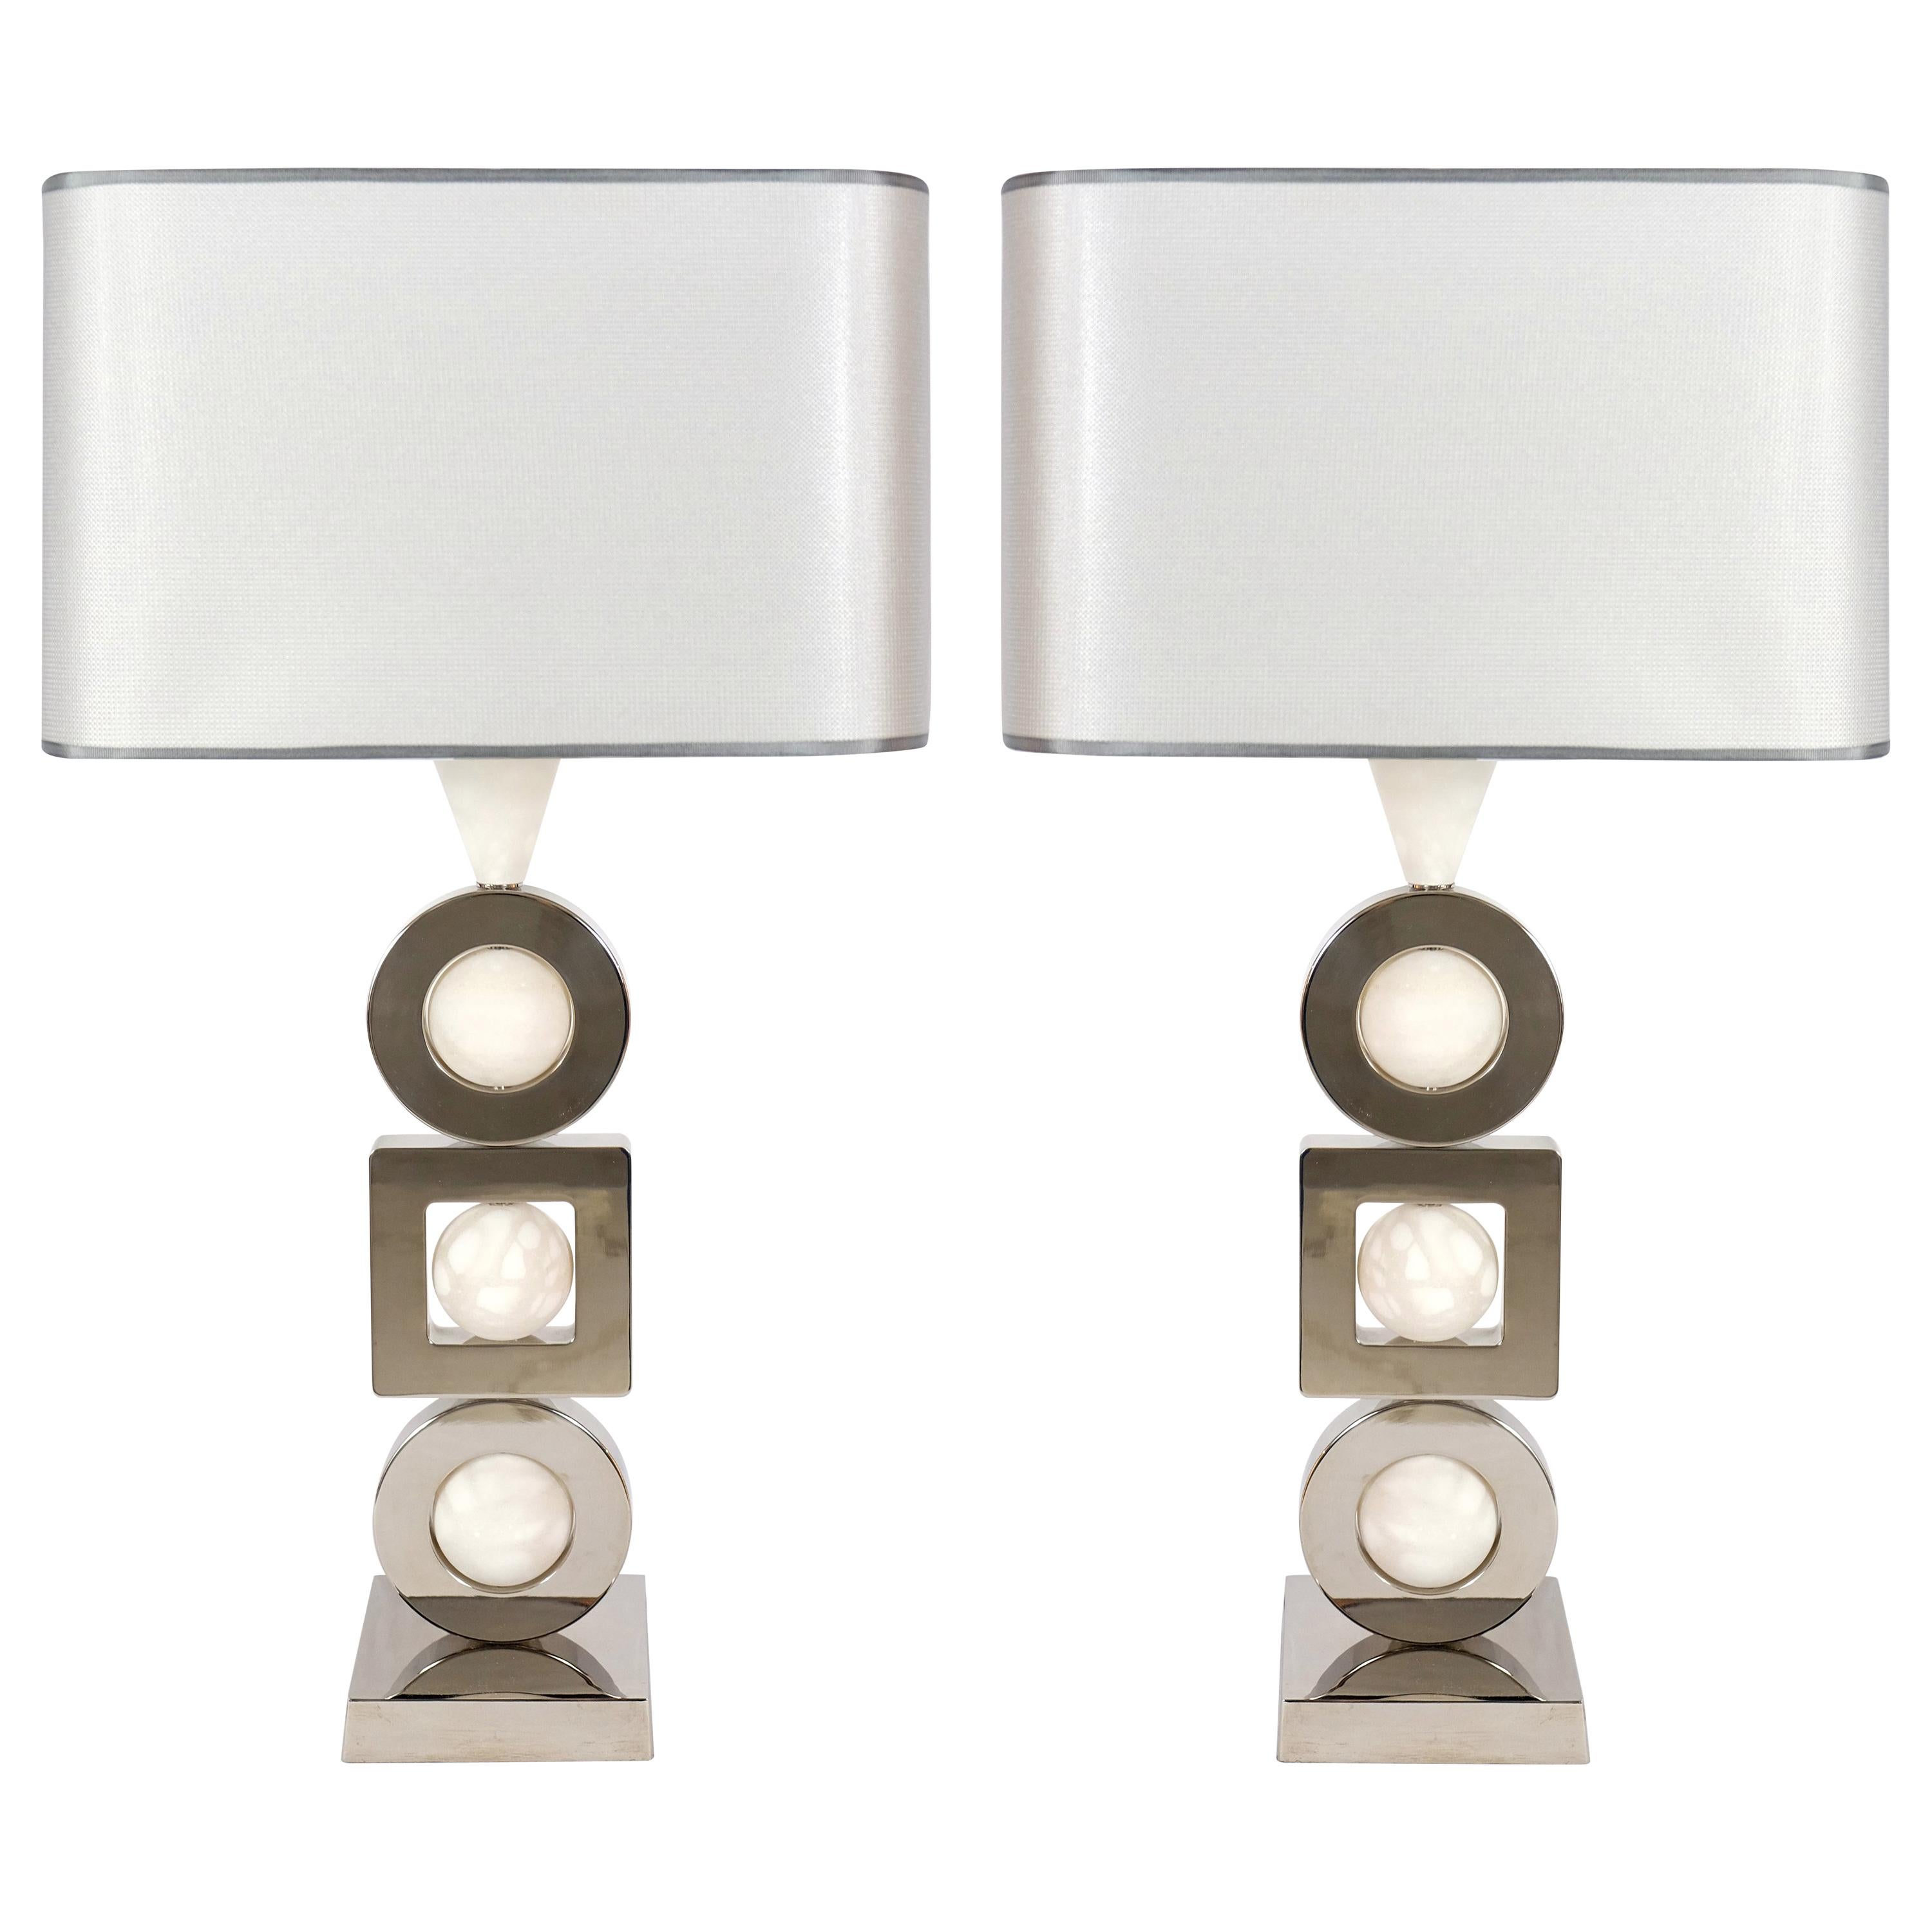 Laudarte Srl Andromeda Table Lamps by Attilio Amato, Pair Available , Vintage  For Sale